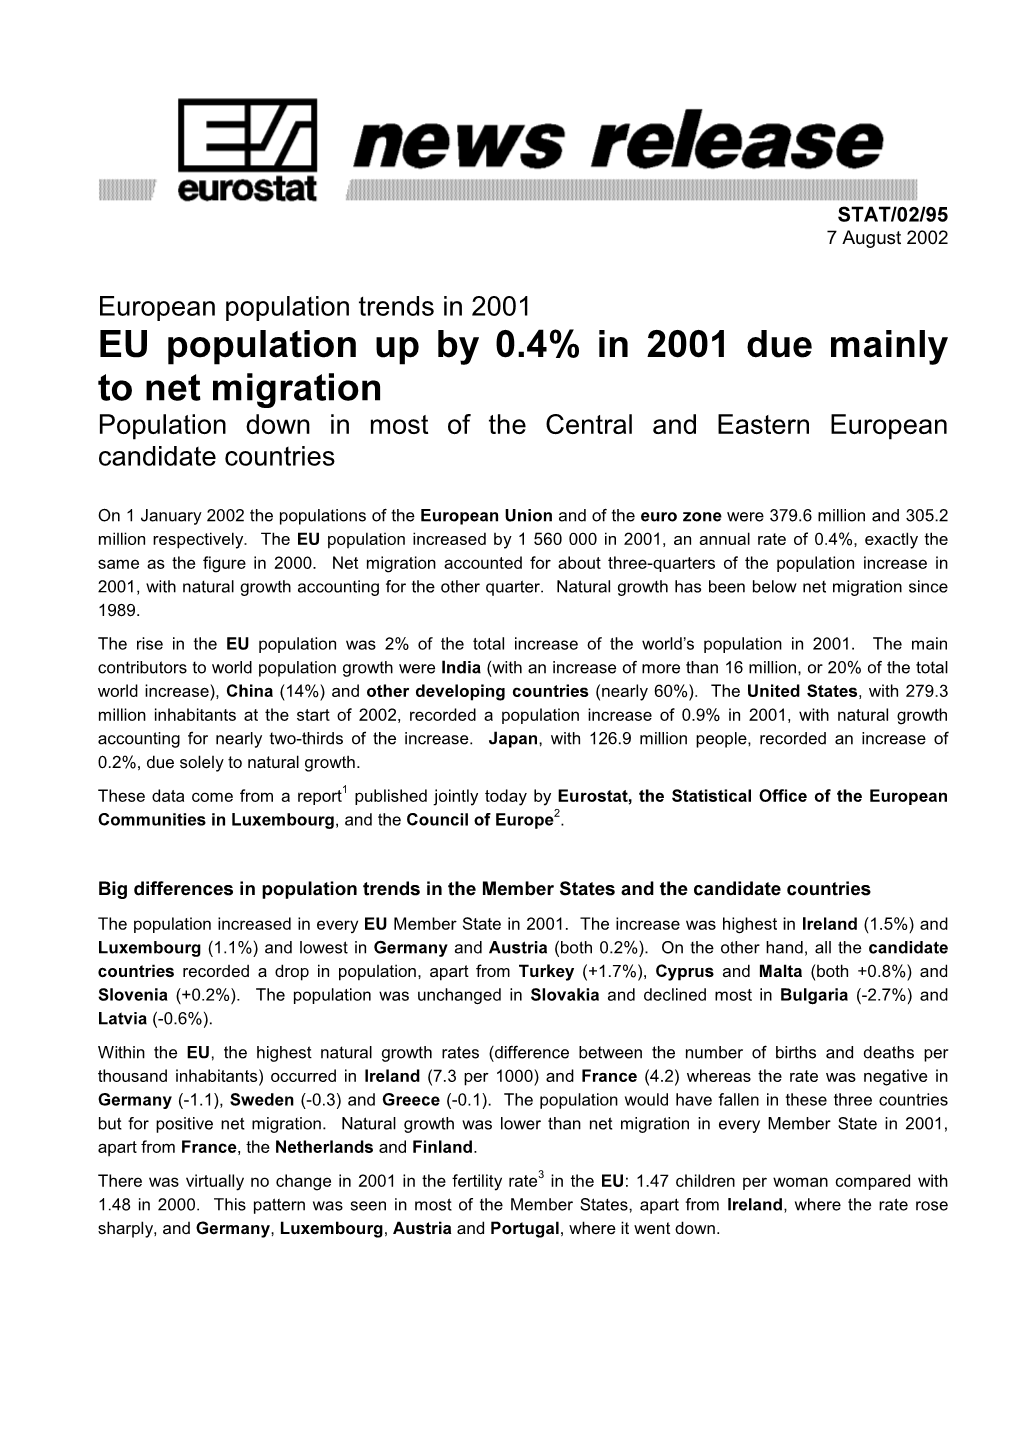 EU Population up by 0.4% in 2001 Due Mainly to Net Migration